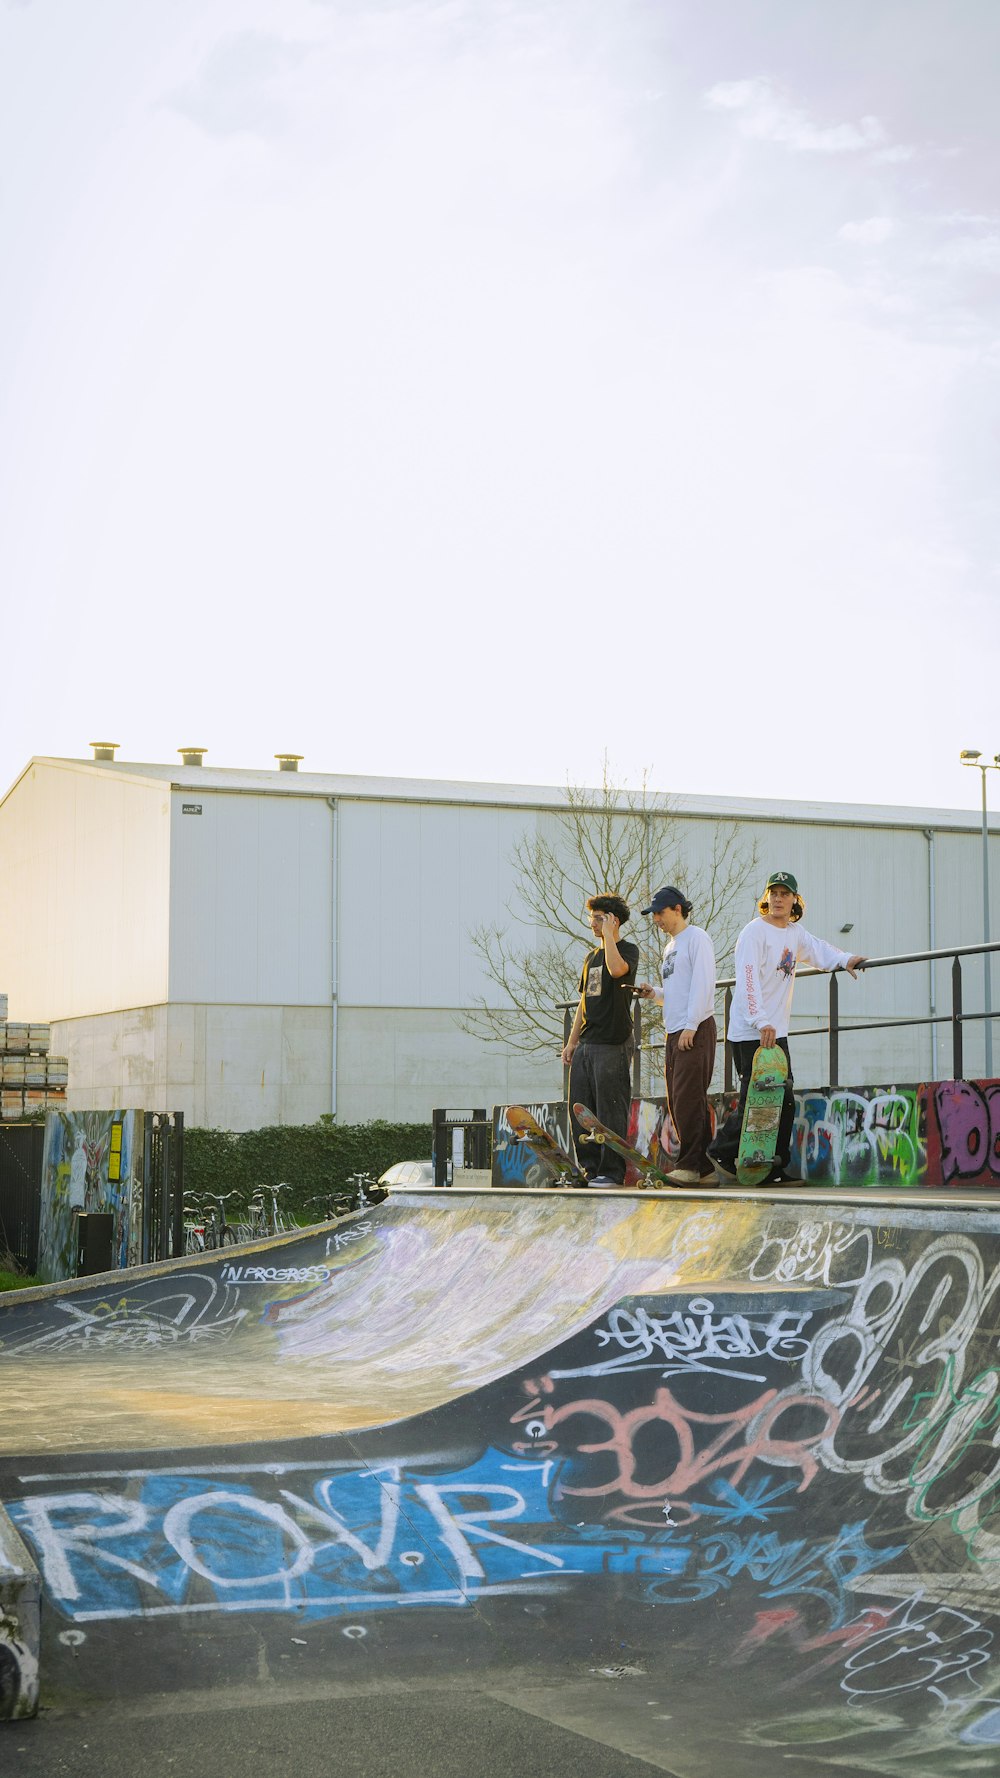 a group of young men standing on top of a skateboard ramp